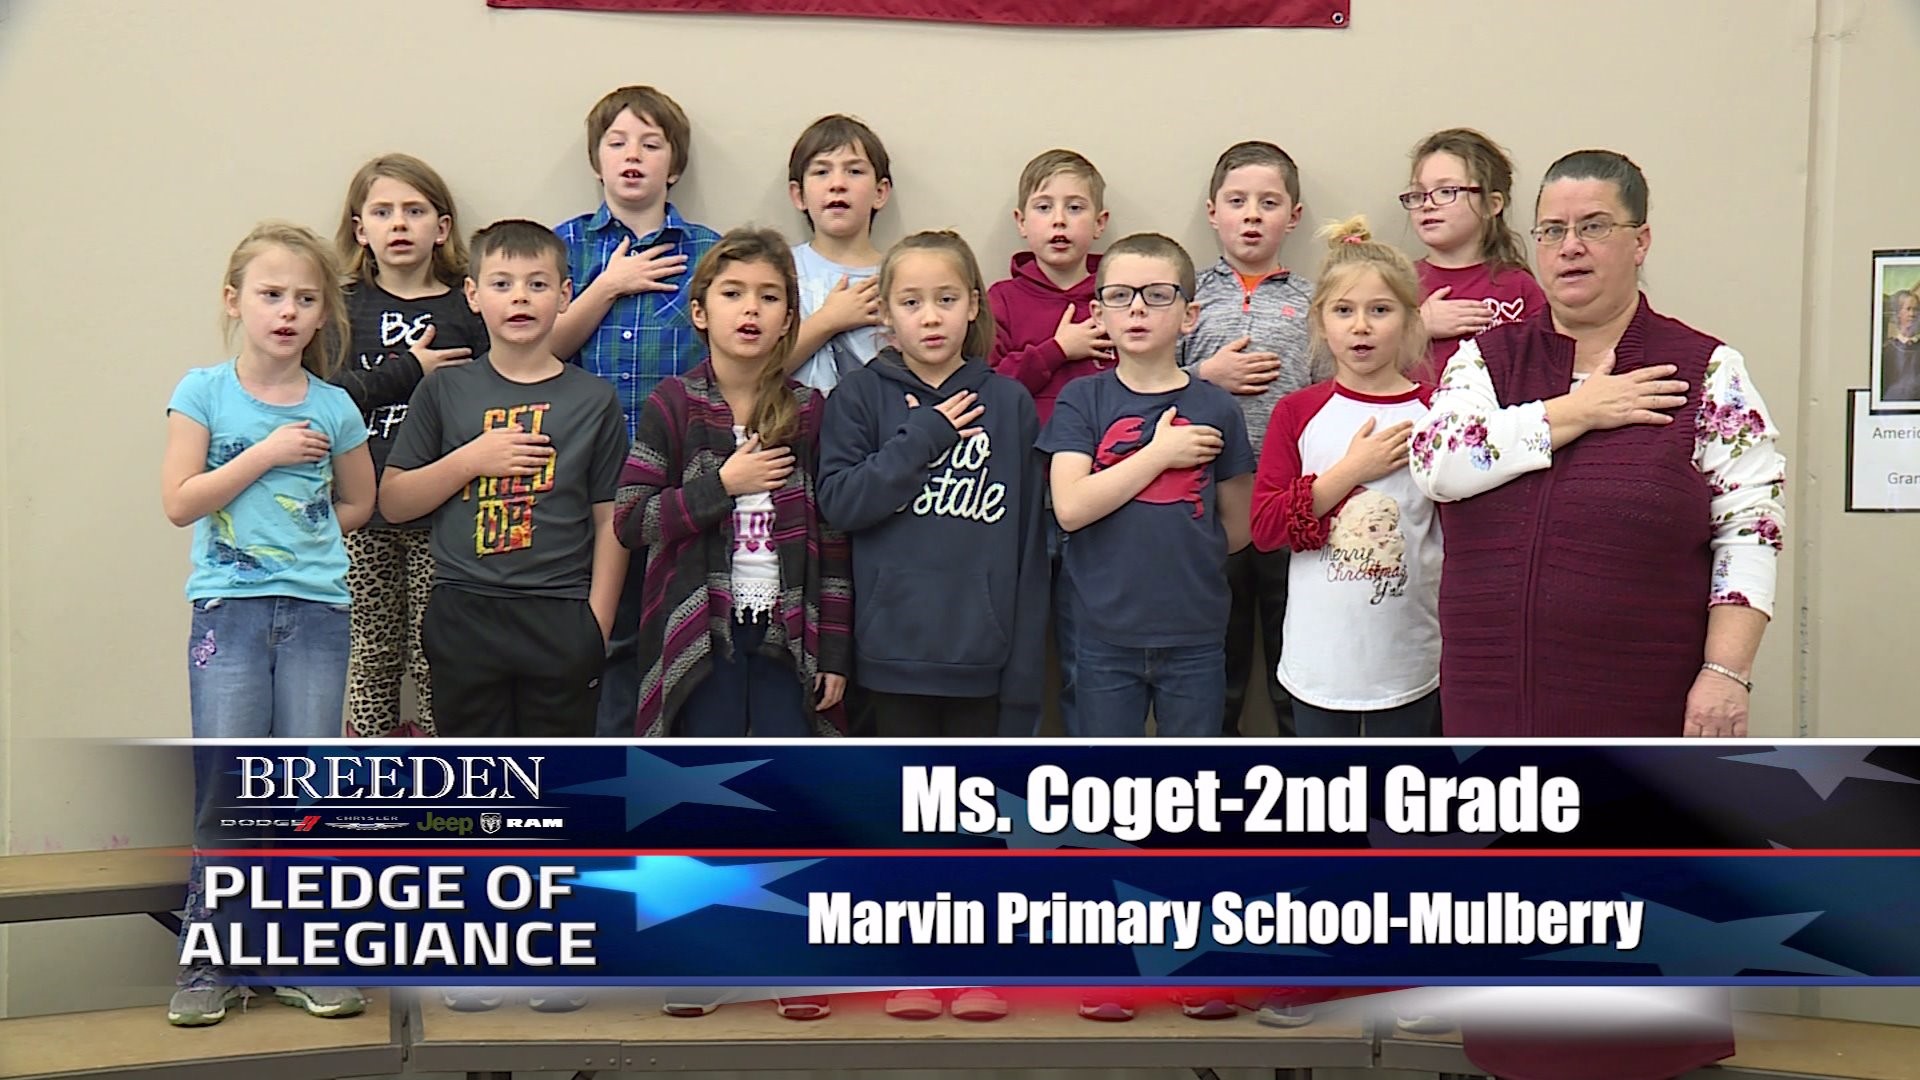 Ms. Coget  2nd Grade Marvin Primary School, Mulberry